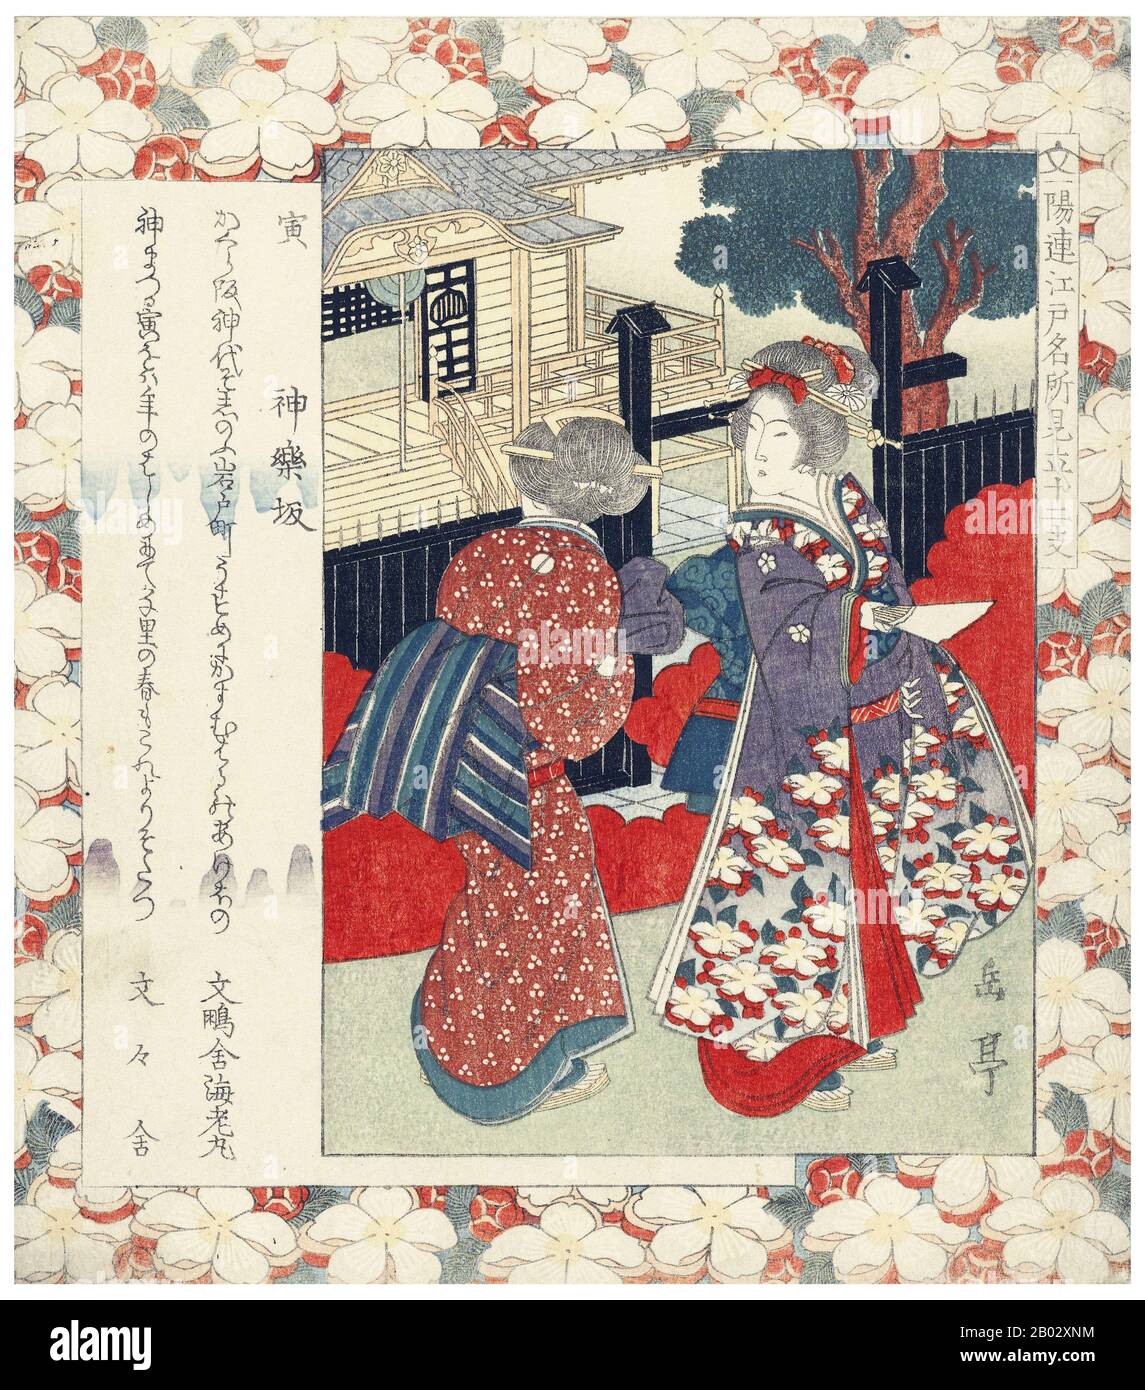 Yashima Gakutei was a Japanese artist and poet who was a pupil of both Totoya Hokkei and Hokusai. Gakutei is best known for his kyoka poetry and surimono woodblock works. Stock Photo